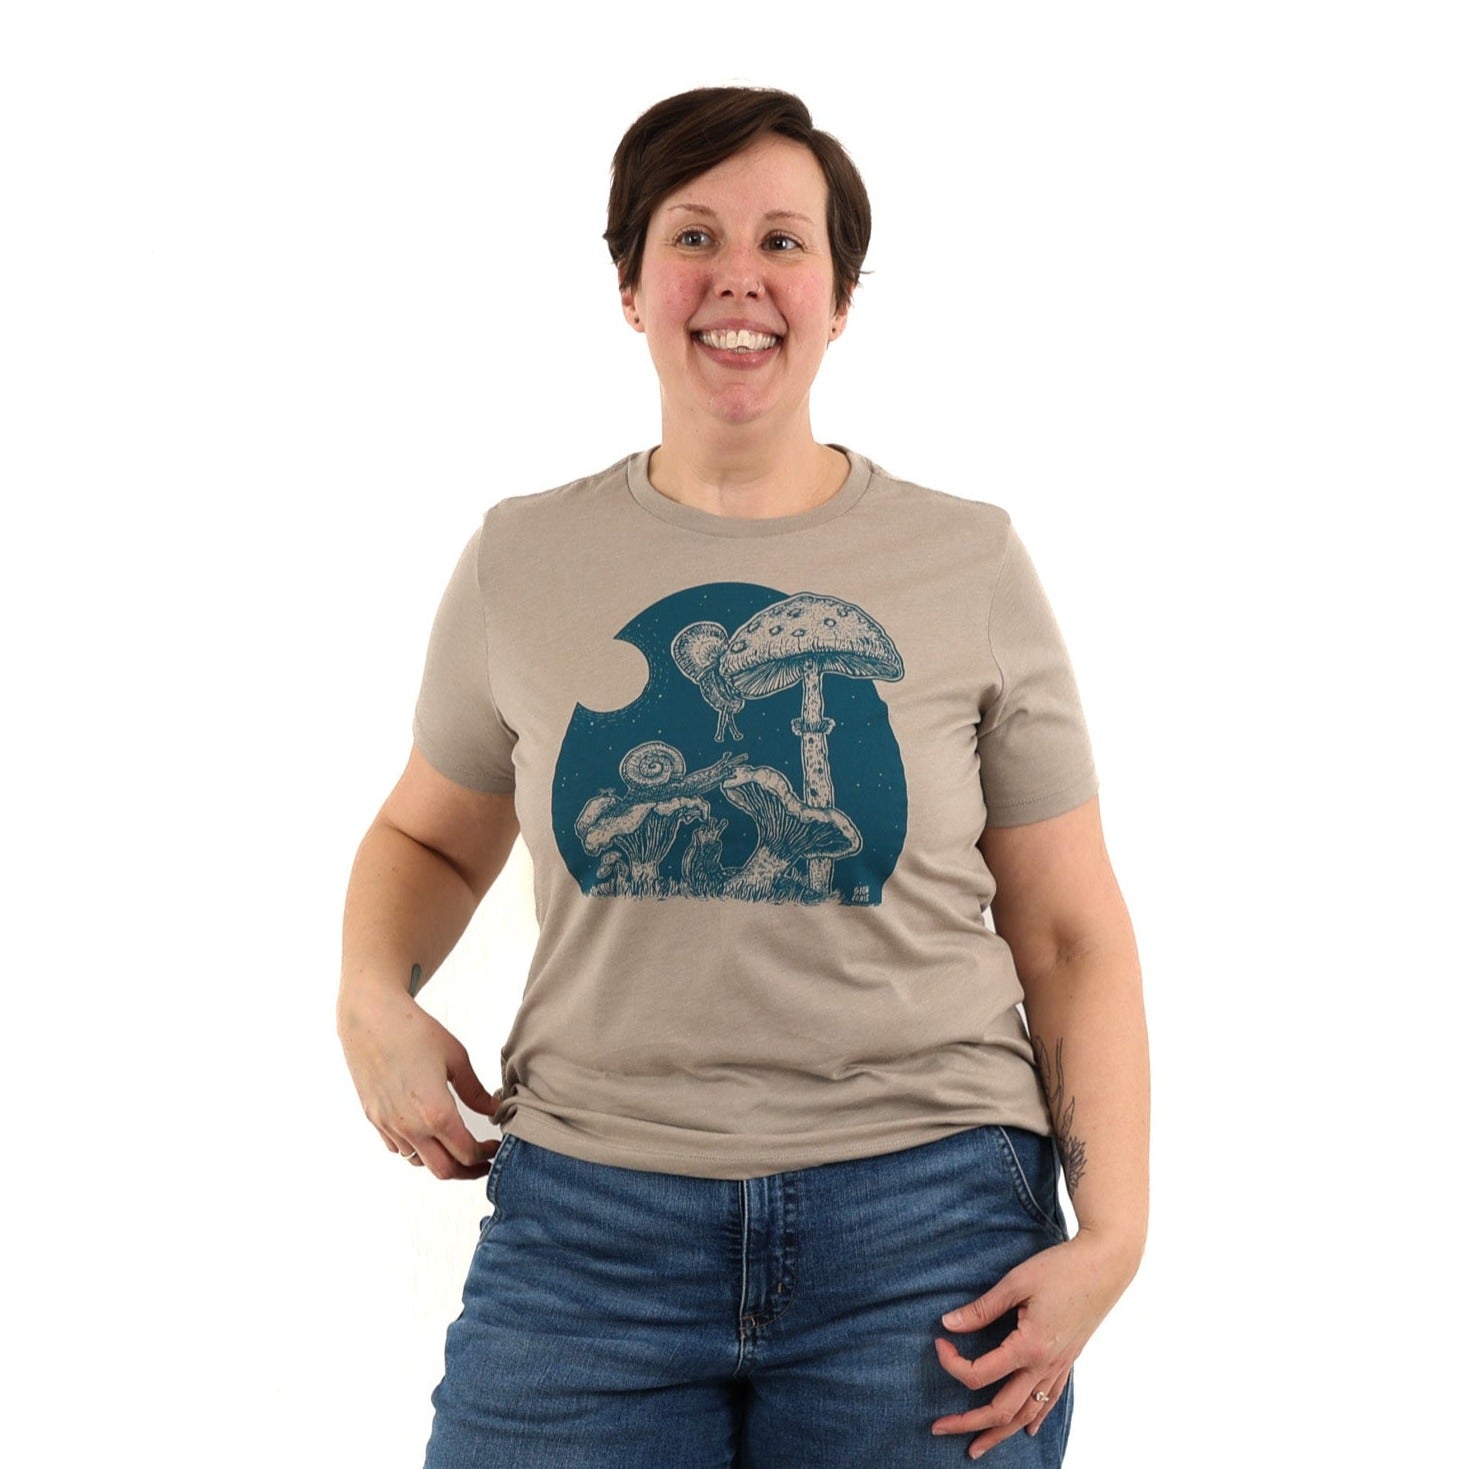 woman wearing tan/brown colored t shirt with blue ink of the full moon buffet slow loris t shirt.